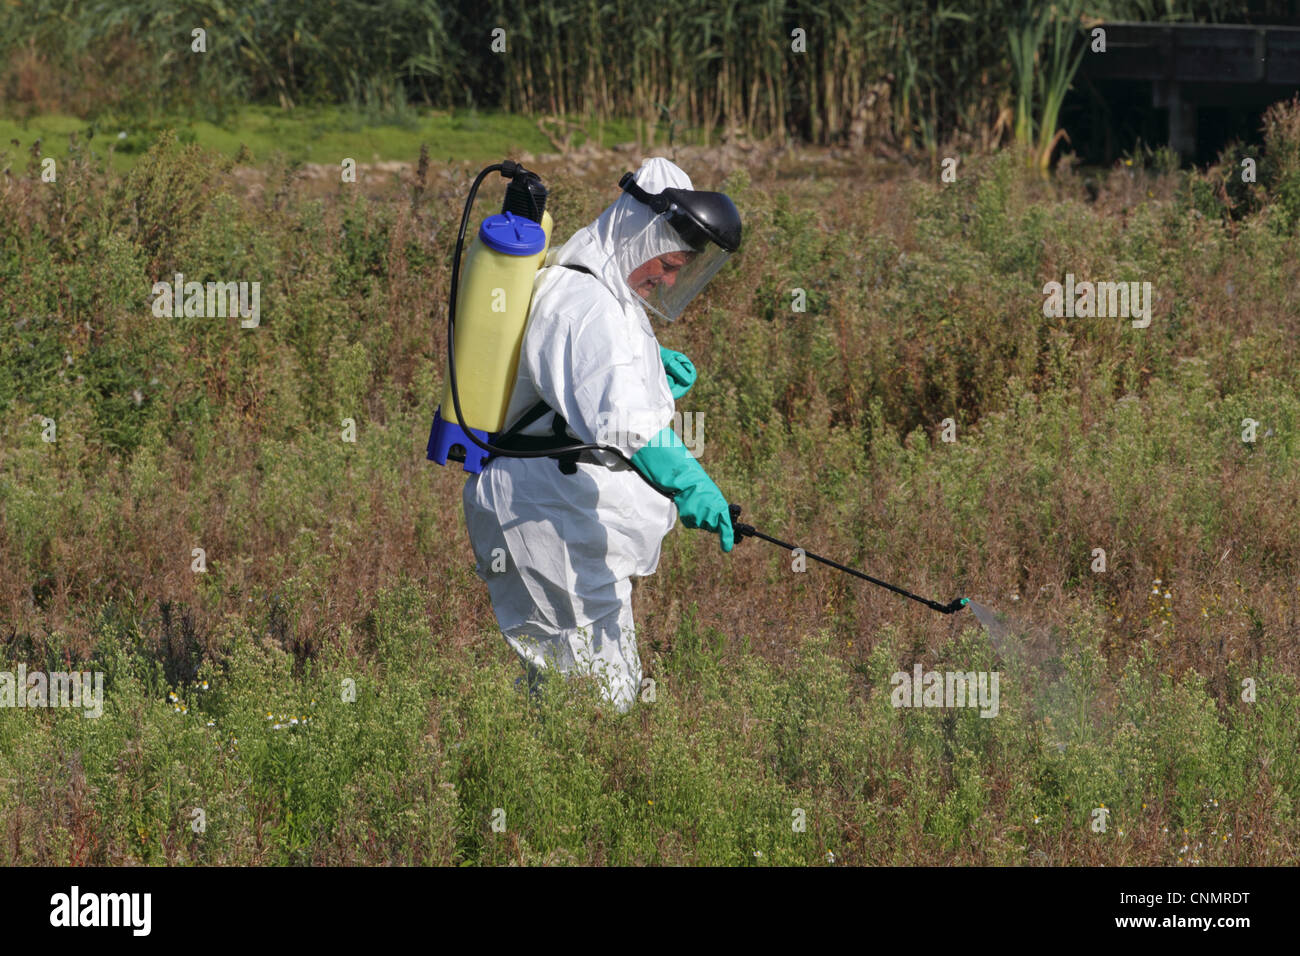 New Zealand Pygmyweed Crassula helmsii introduced invasive weed being sprayed herbicide by person protective clothing Rye Meads Stock Photo